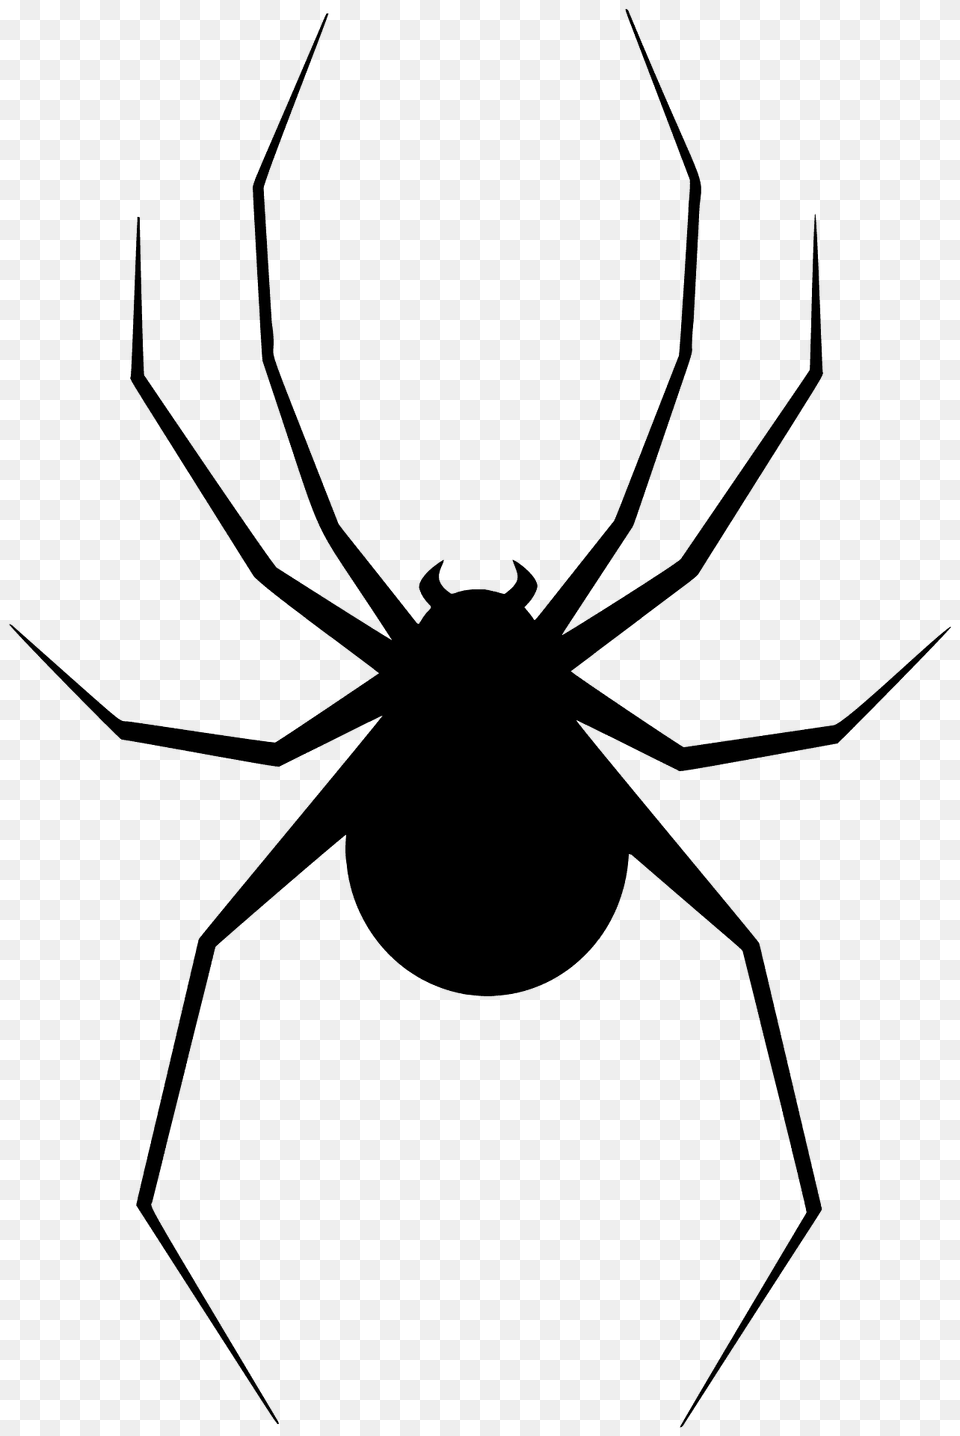 Spider Silhouette, Animal, Invertebrate, Bow, Weapon Png Image